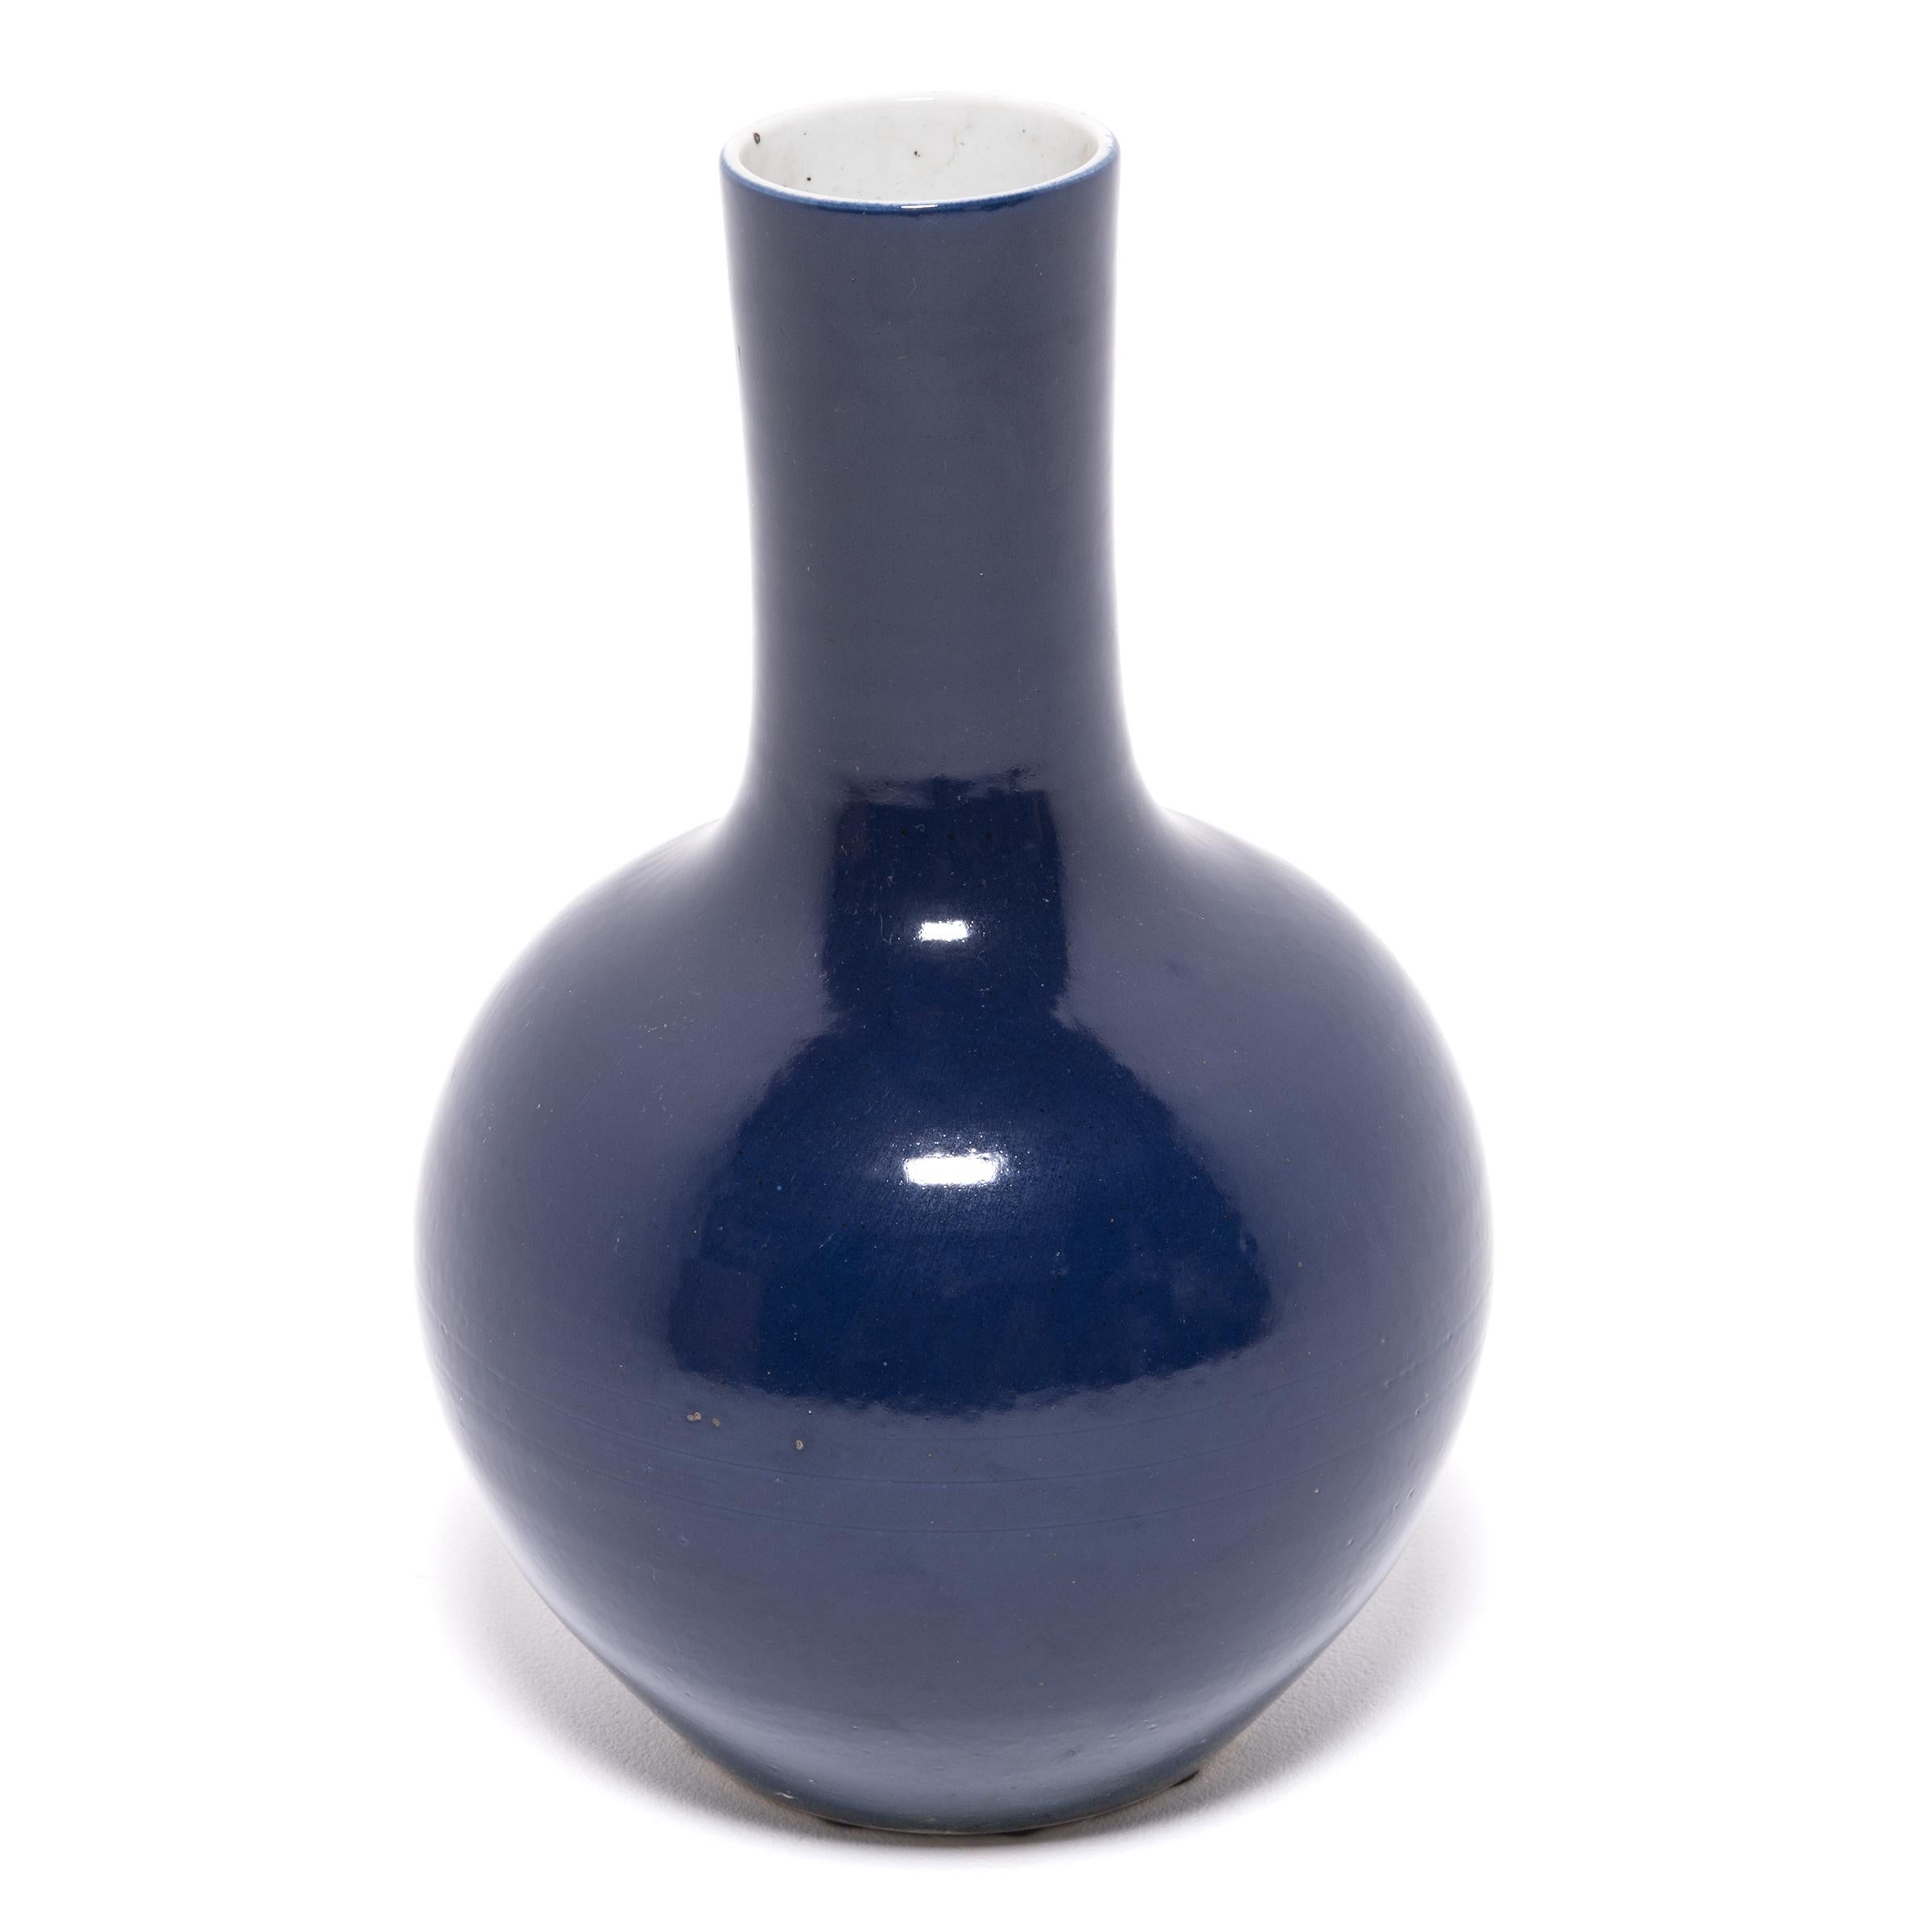 Drawing on a long Chinese tradition of monochrome ceramics, this tall gooseneck vase is coated in a deep blue glaze, reminiscent of a dark night sky. The vase features a rounded, globular body and a narrow cylindrical neck, a classic form known as